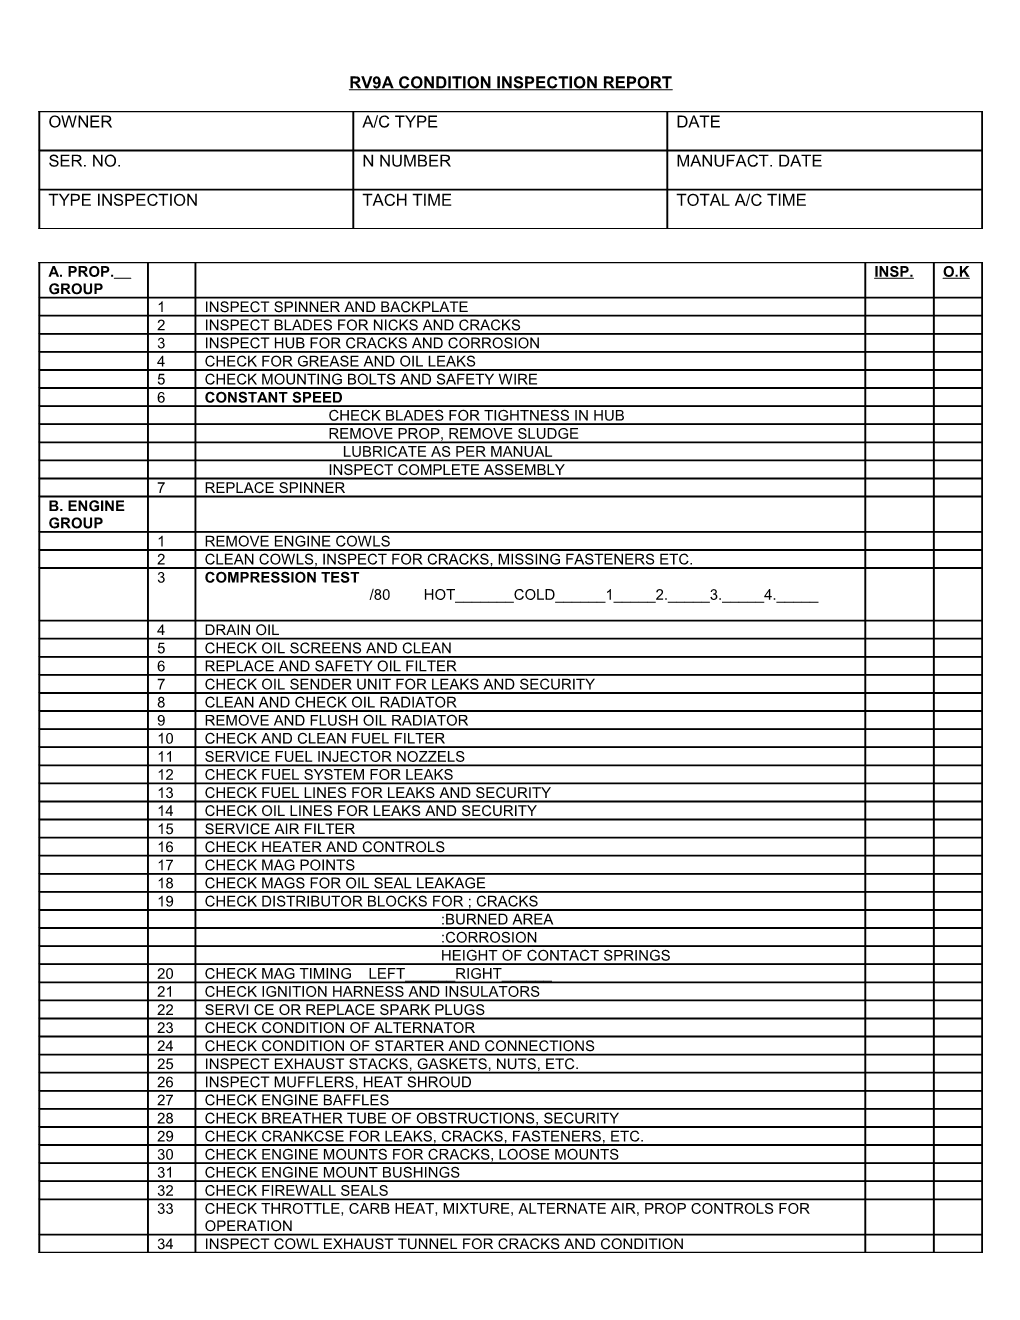 Rv9 Condition Inspection Report